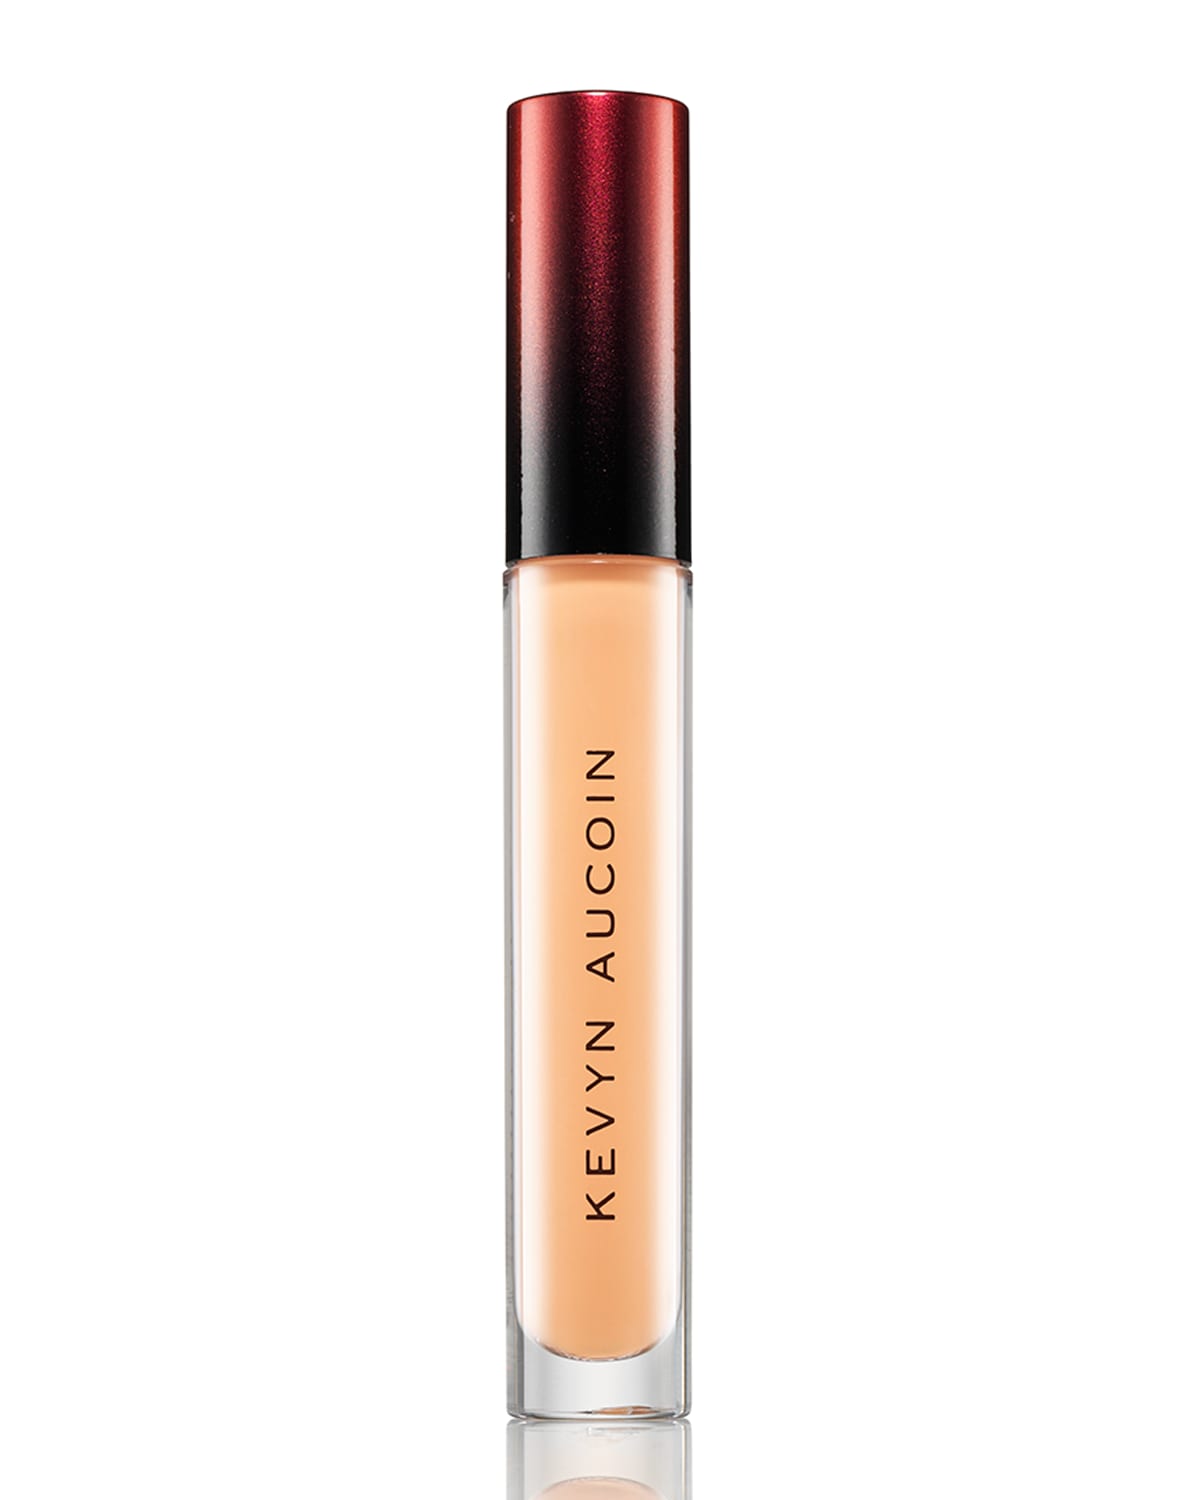 Kevyn Aucoin 1.2 oz. The Etherealist Super Natural Concealer Corrector